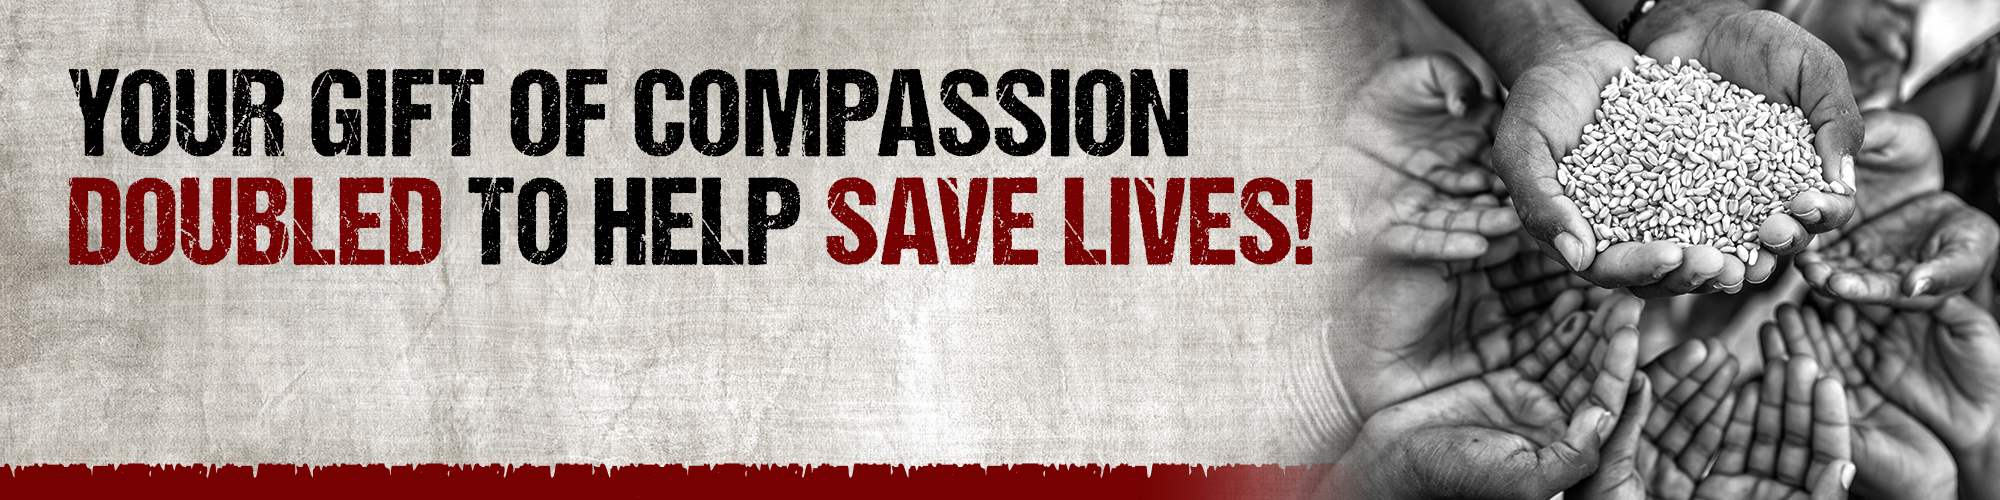 Your Gift of Compassion Doubled to Help Save Lives